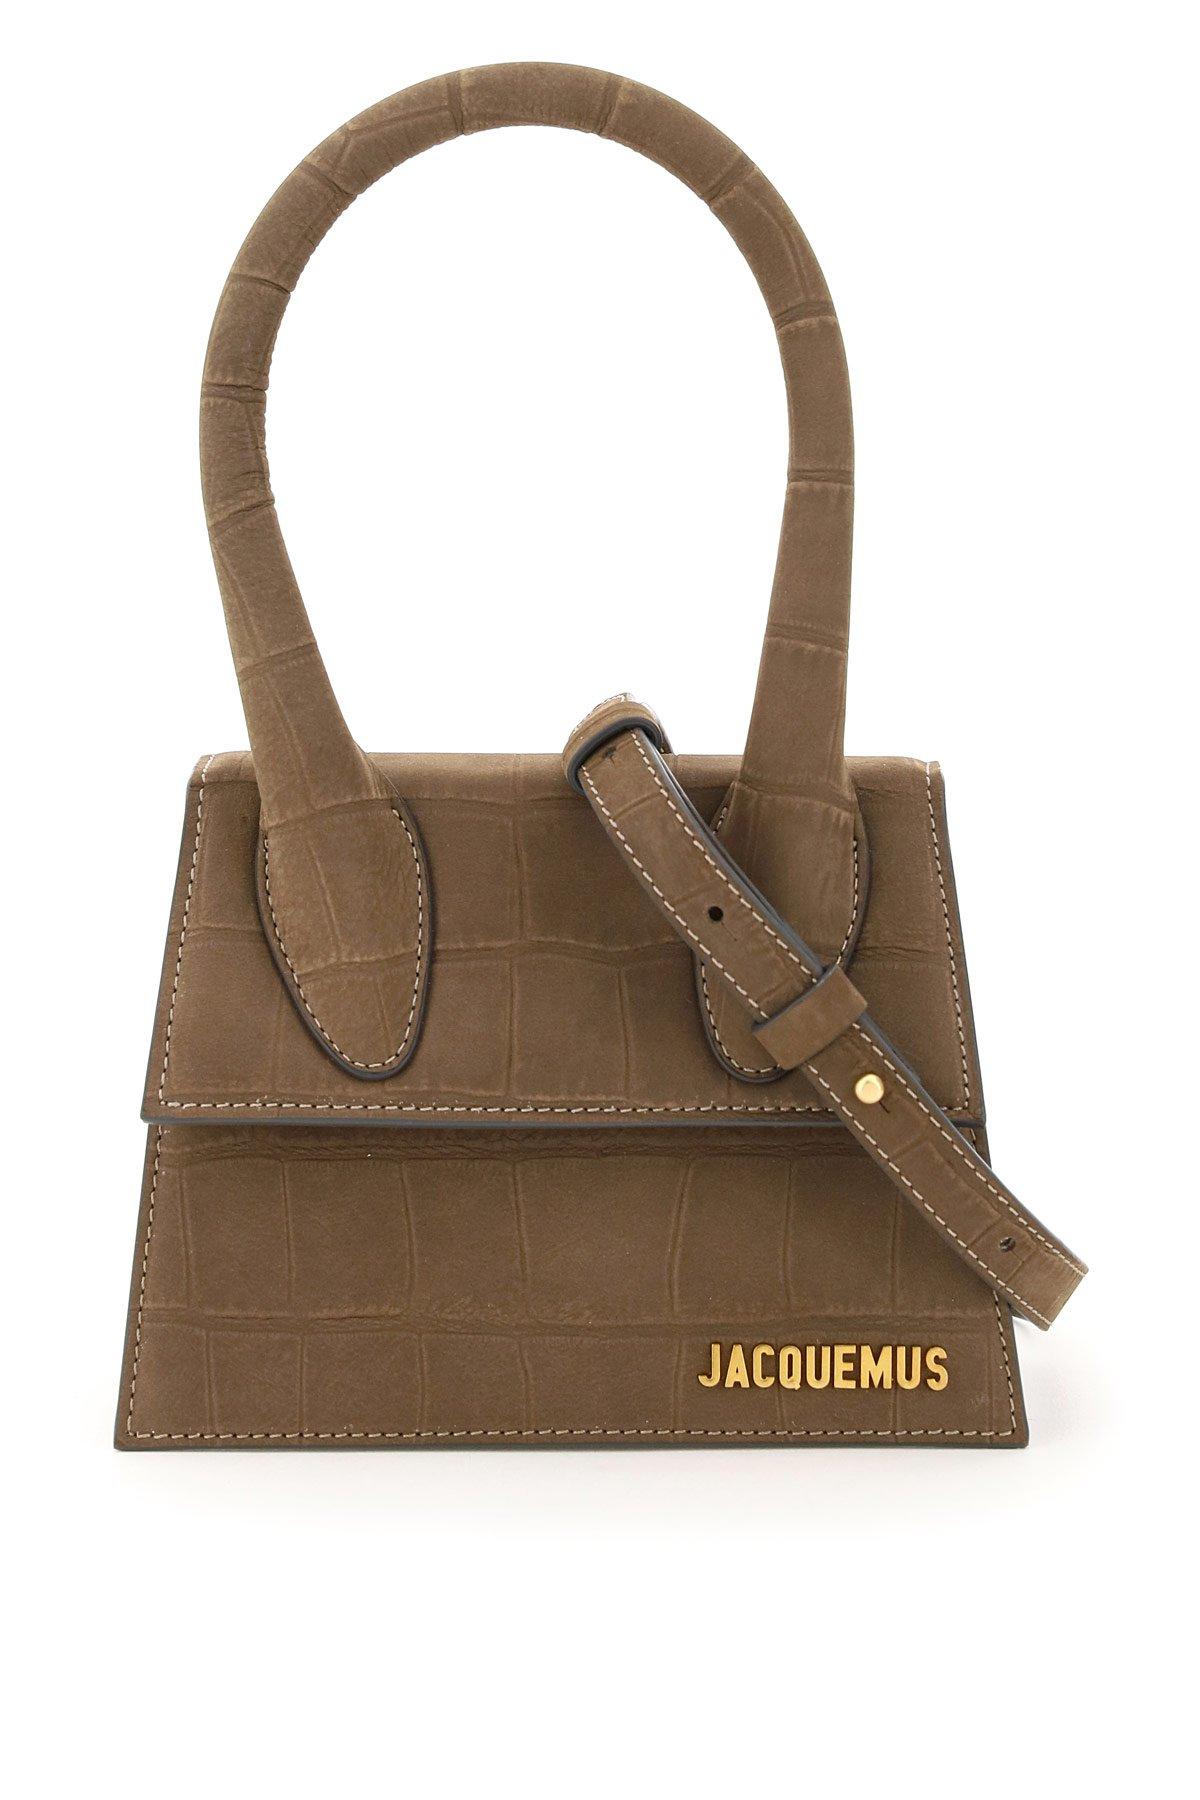 Jacquemus Leather Le Chiquito Moyen Handbag in Beige (Brown) - Lyst